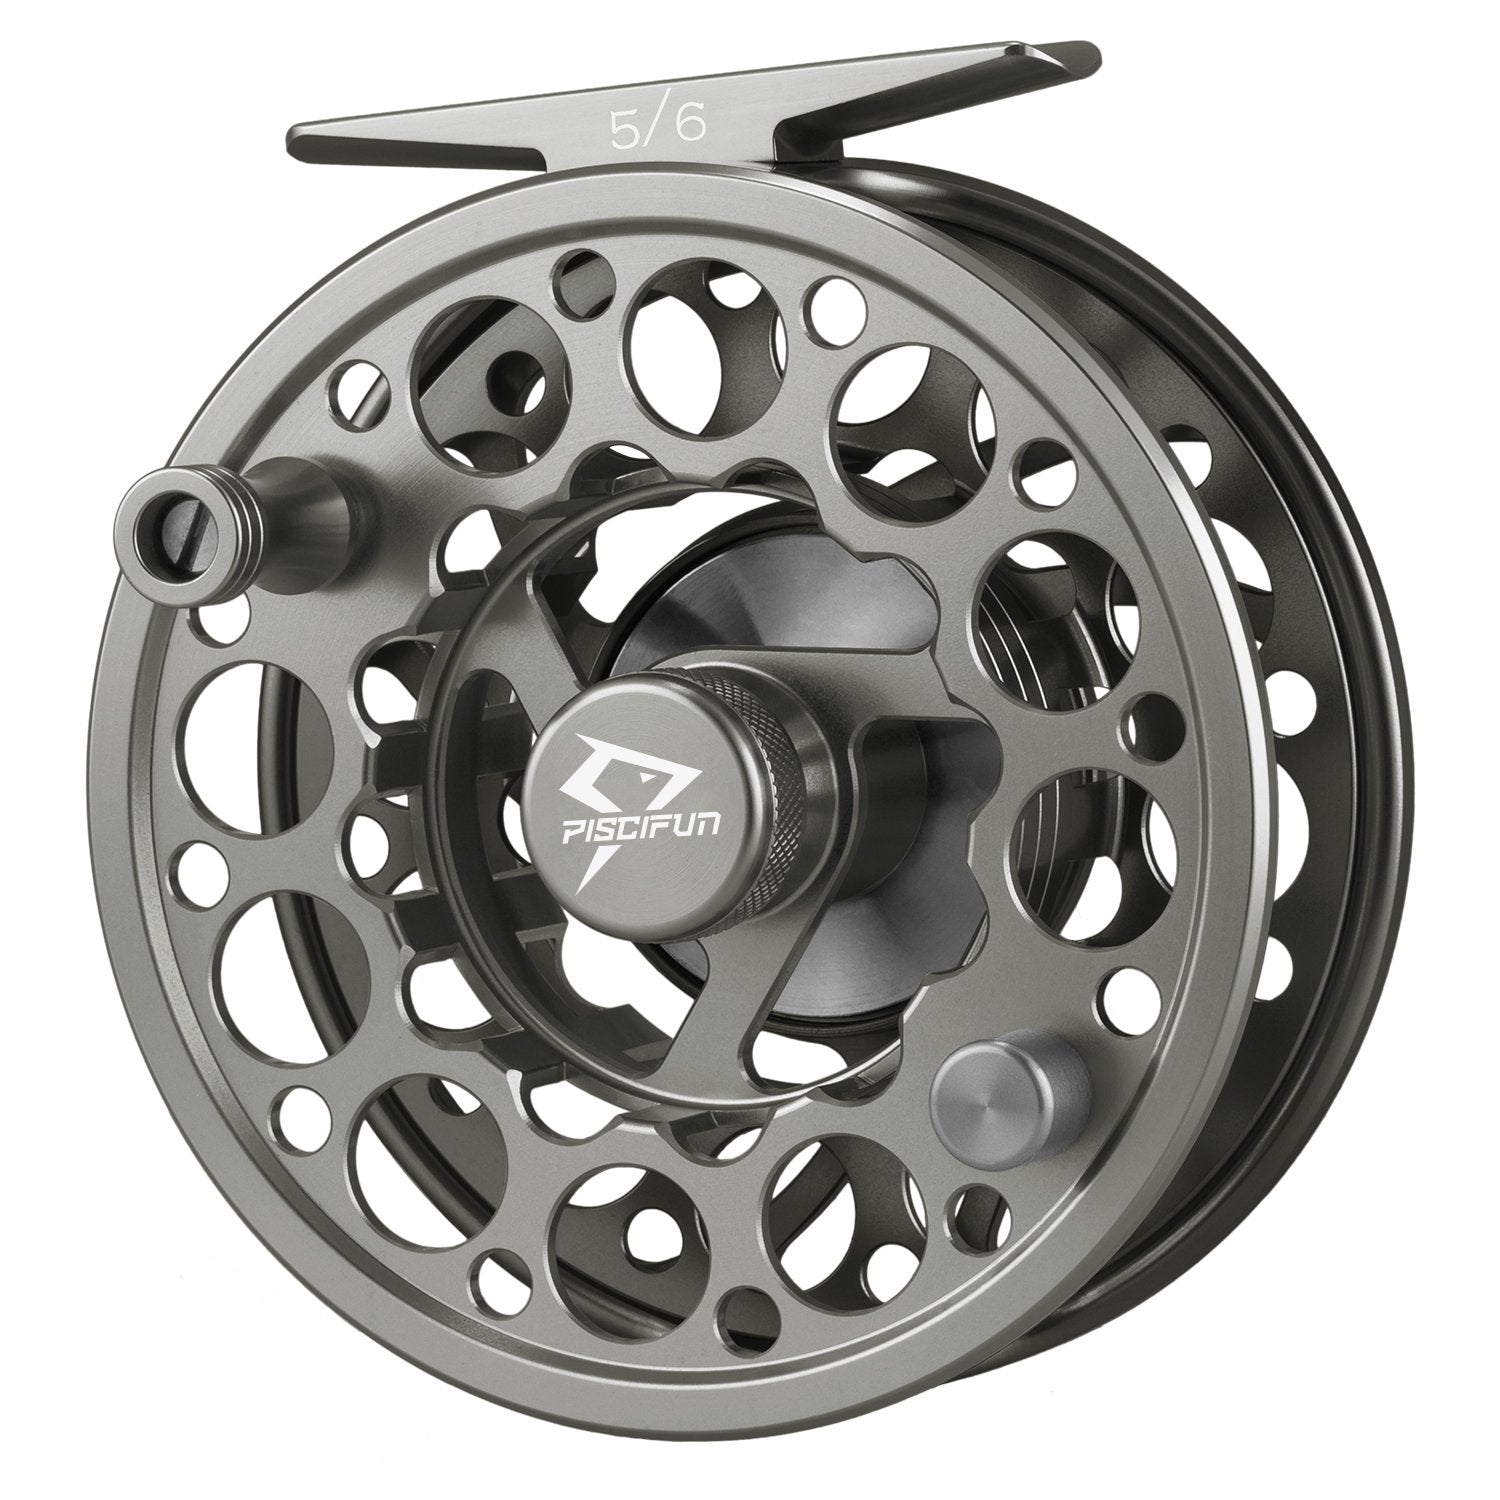 Piscifun Aoka XS Fly Fishing Reel with Sealed Drag,CNC-machined Aluminum  Alloy Body and Spool Light Weight Design Fly Fishing Reel with Clicker Drag  System Freshwater Fly Reel Fruit Green 5/6wt, Reels 